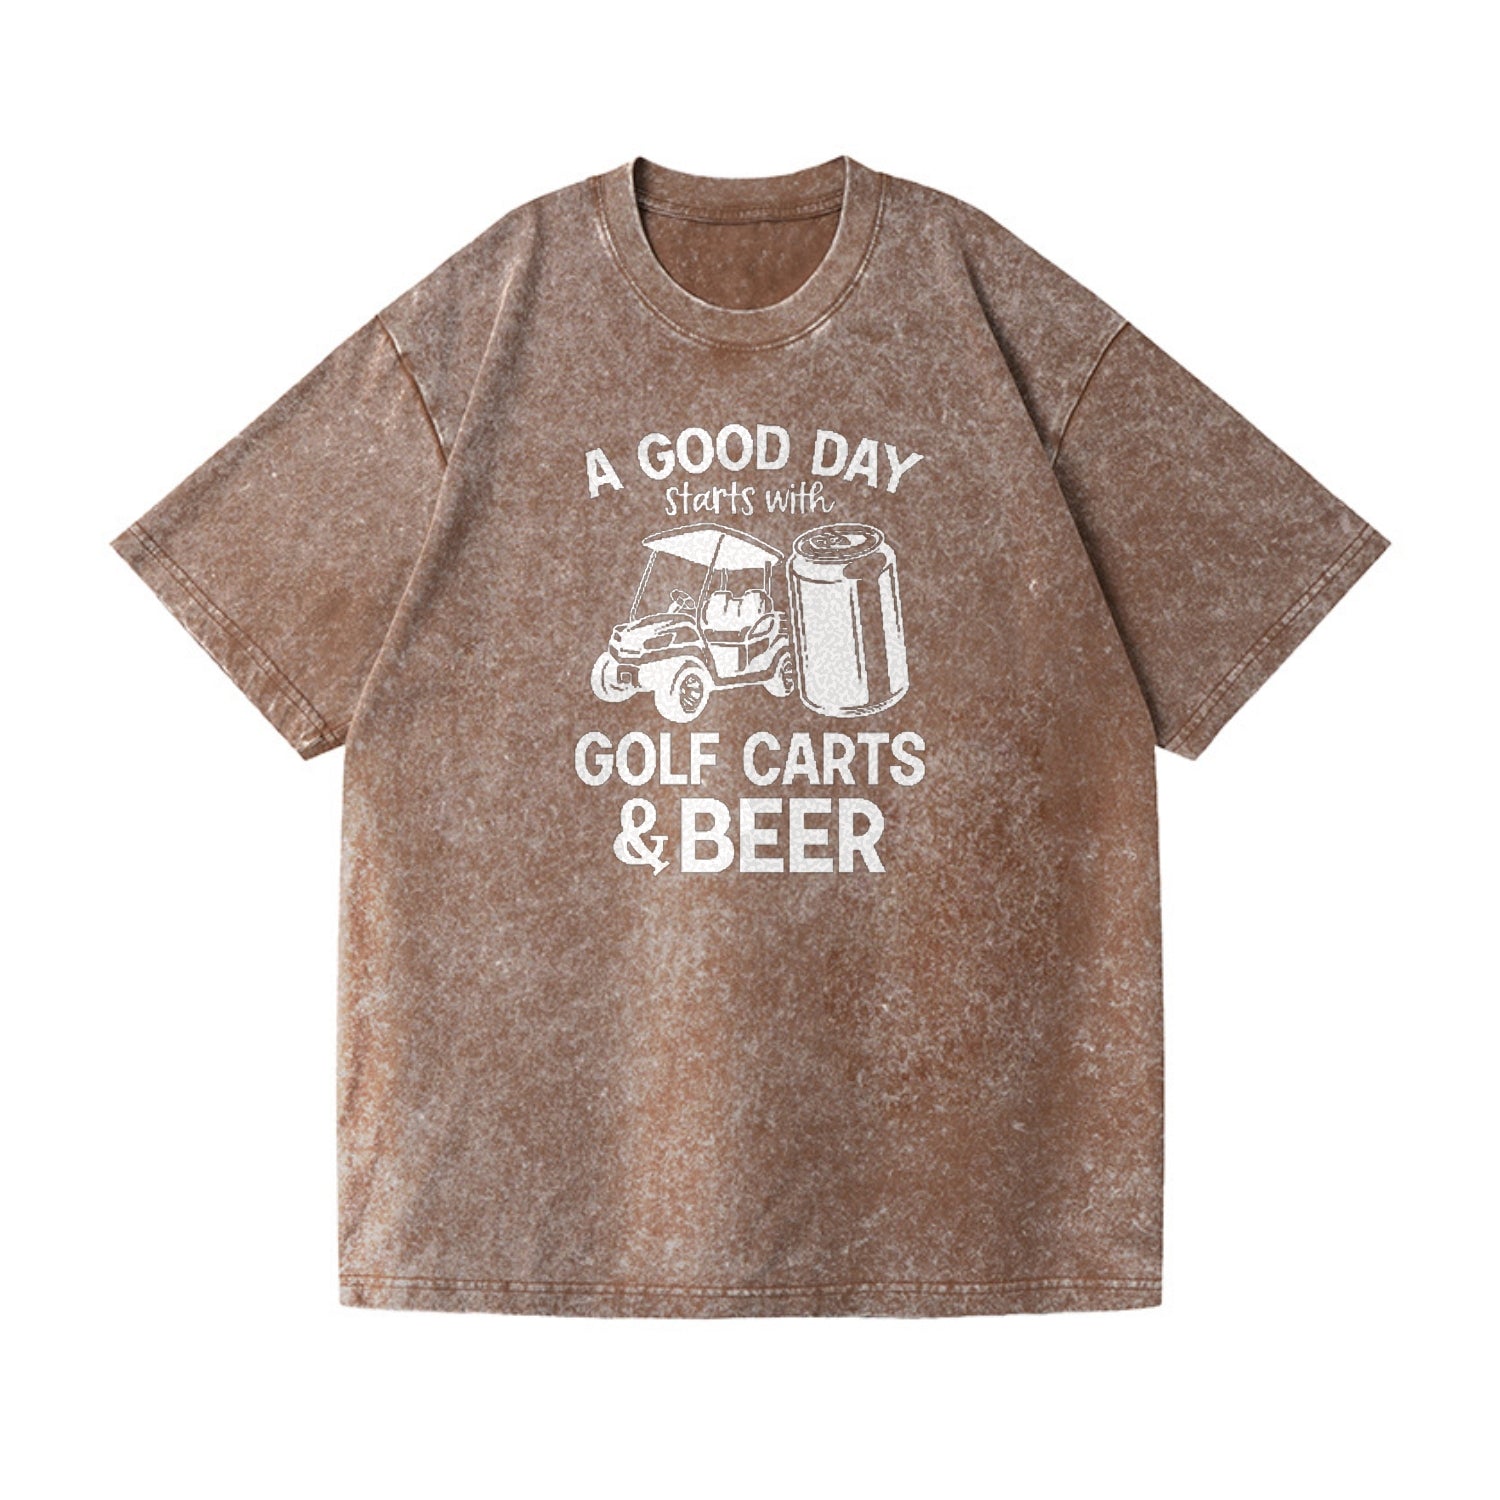 A Good Day Starts With Golf Carts And Beer Vintage T-shirt